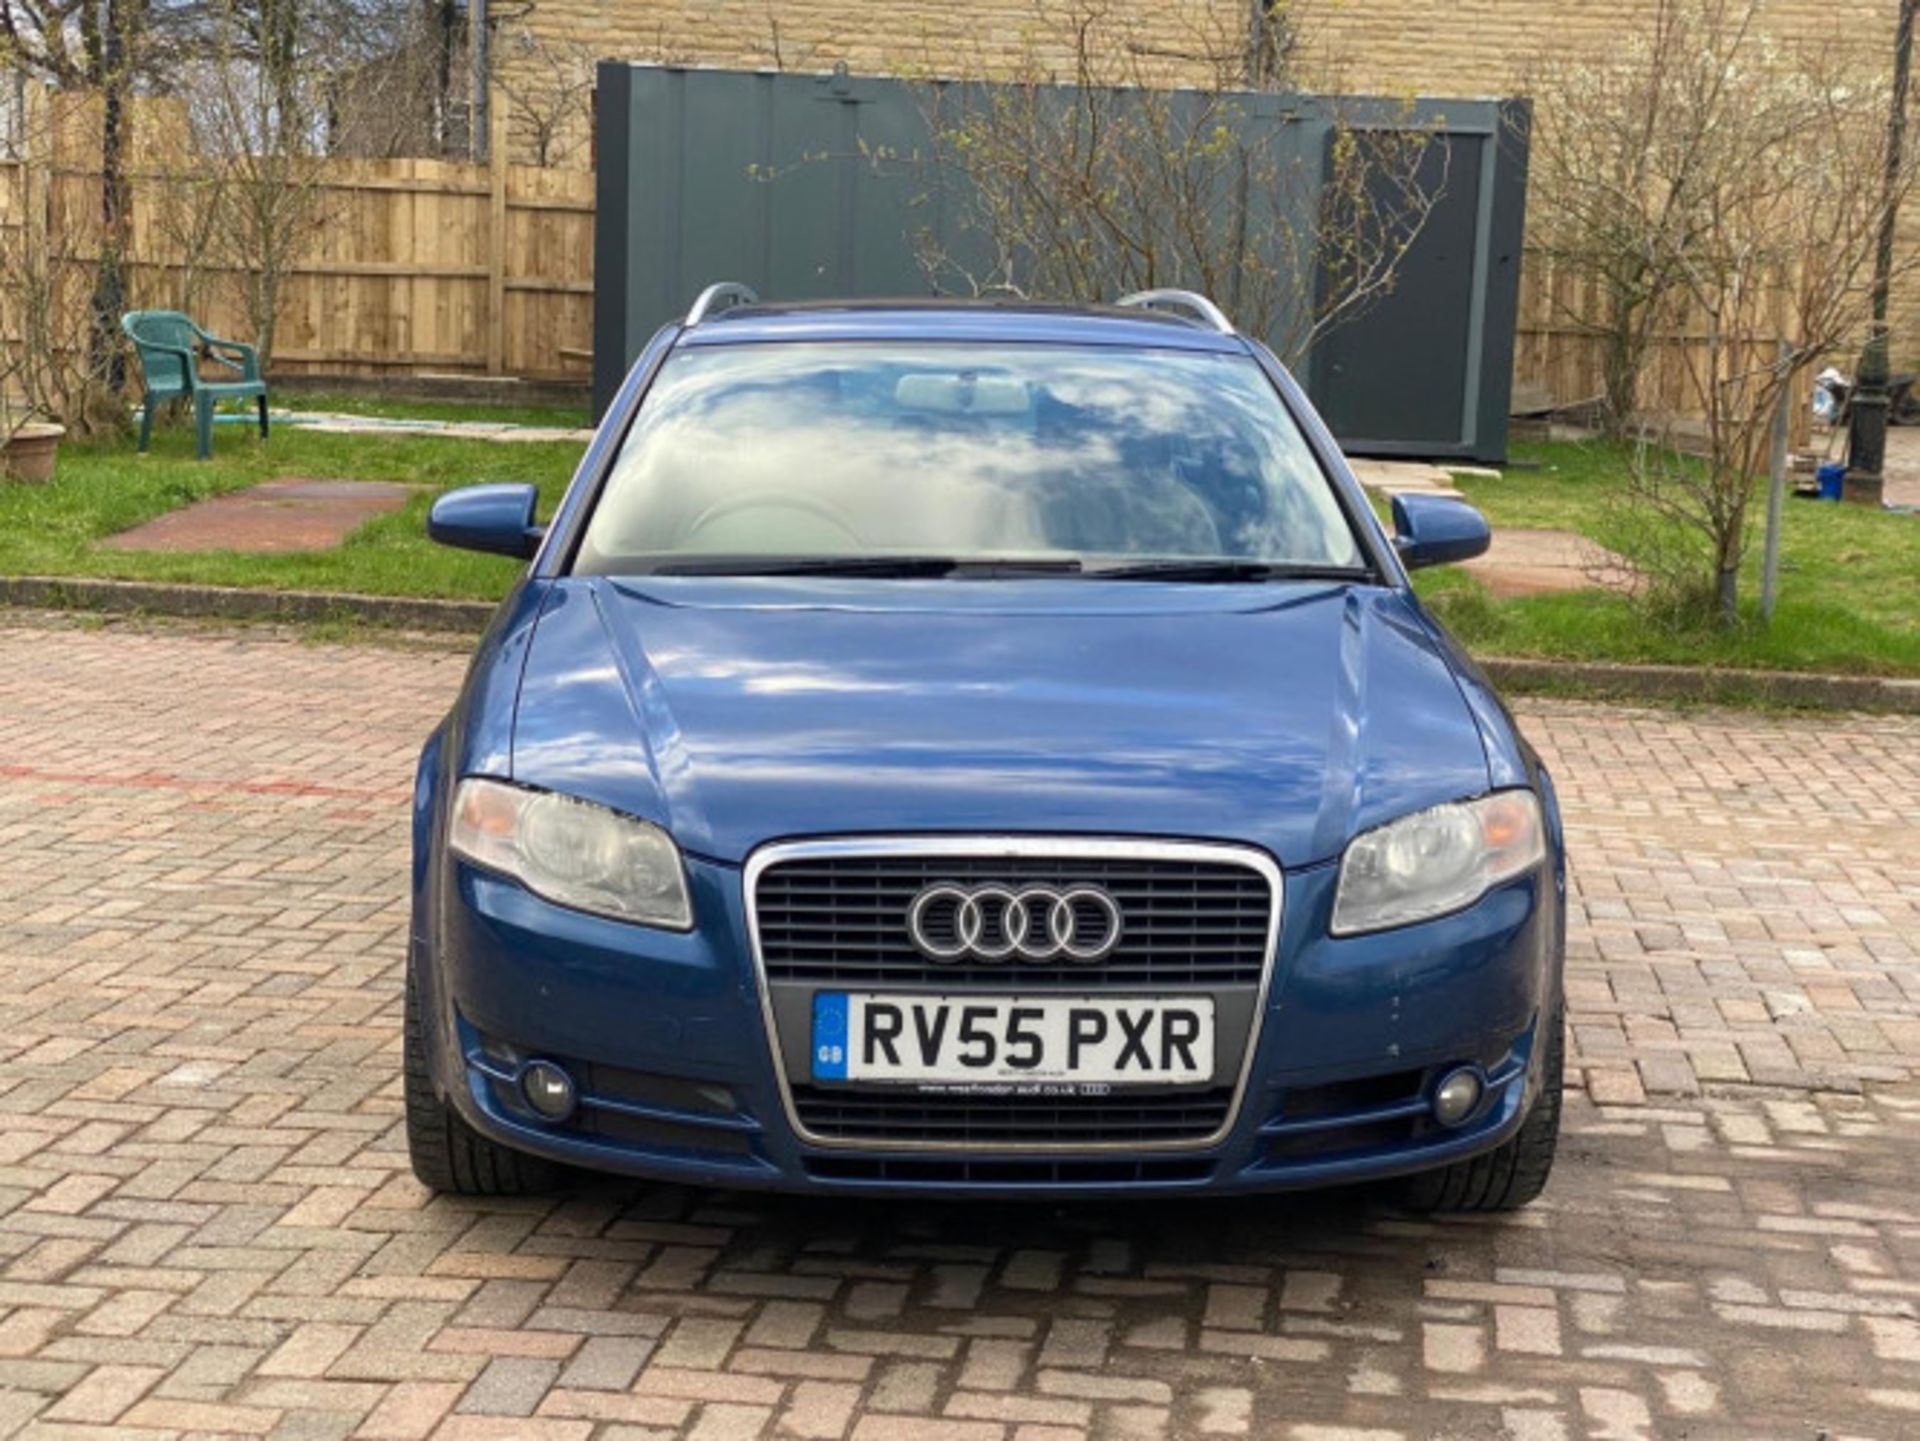 AUDI A4 AVANT 1.9 TDI SE 5DR ESTATE - RARE AND RELIABLE LUXURY WAGON >>--NO VAT ON HAMMER--<< - Image 95 of 97